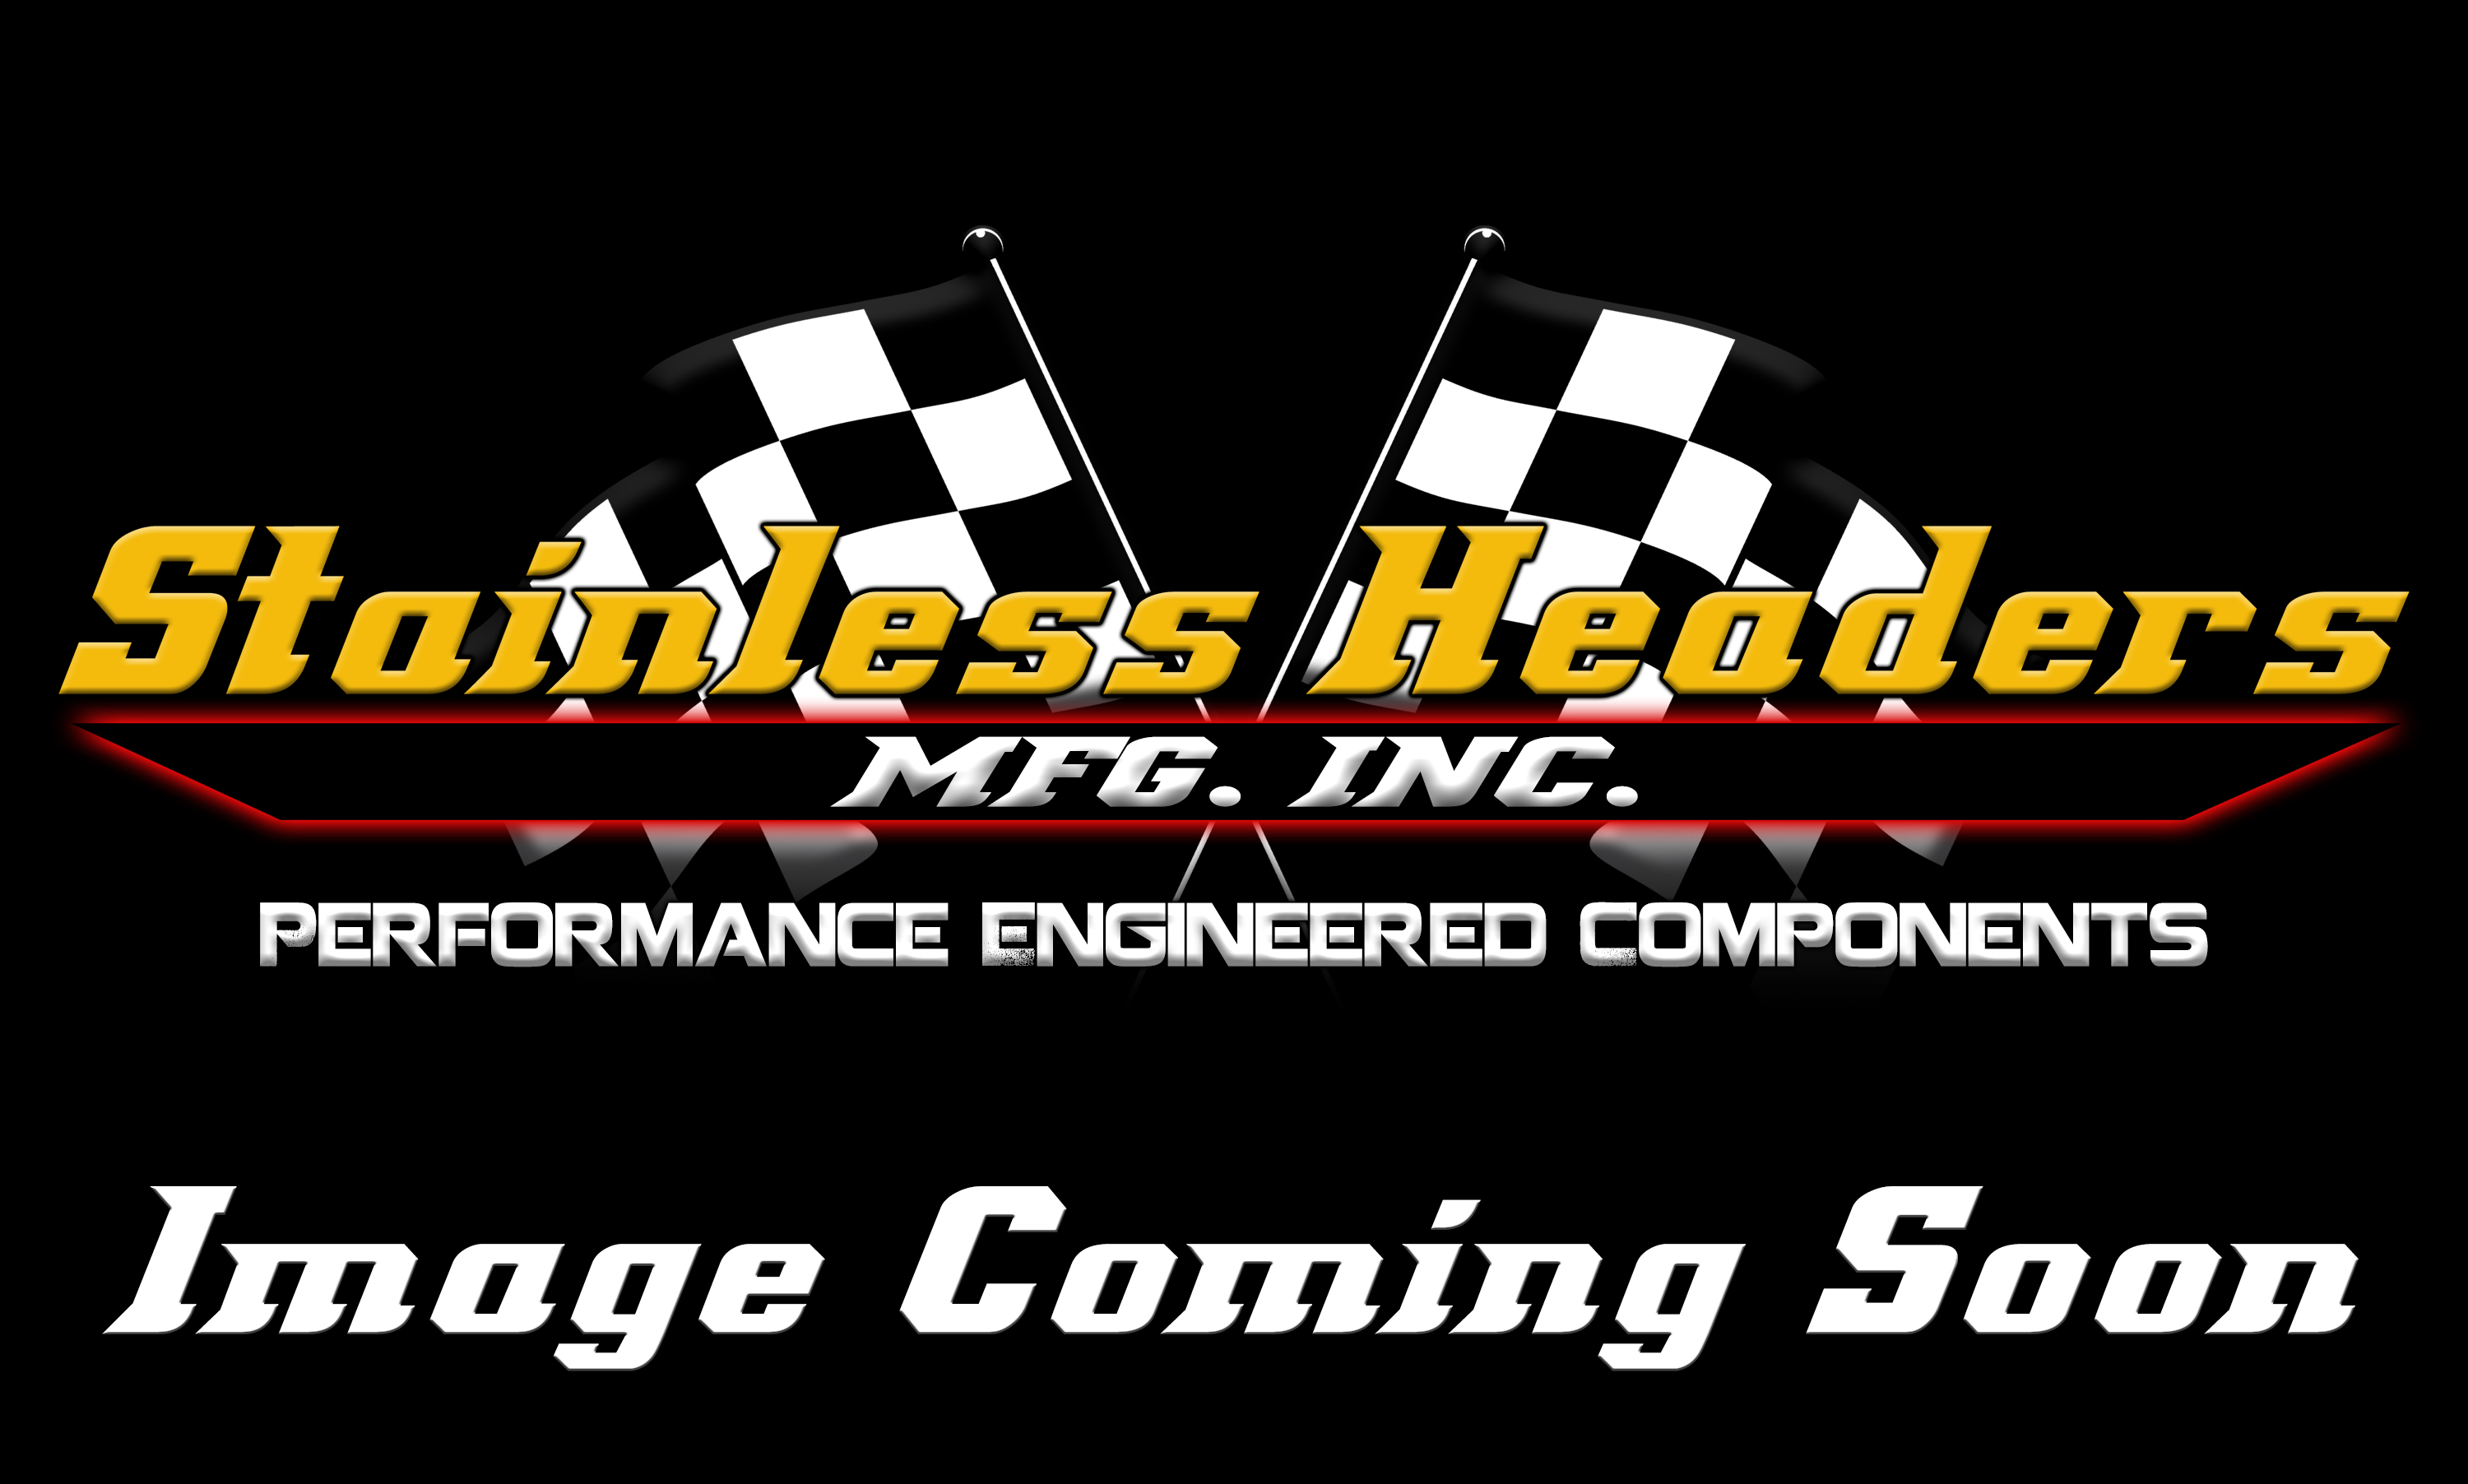 Stainless Headers - 2 1/8" Primary 2 into 1 Performance Merge Collector-16ga Mild Steel